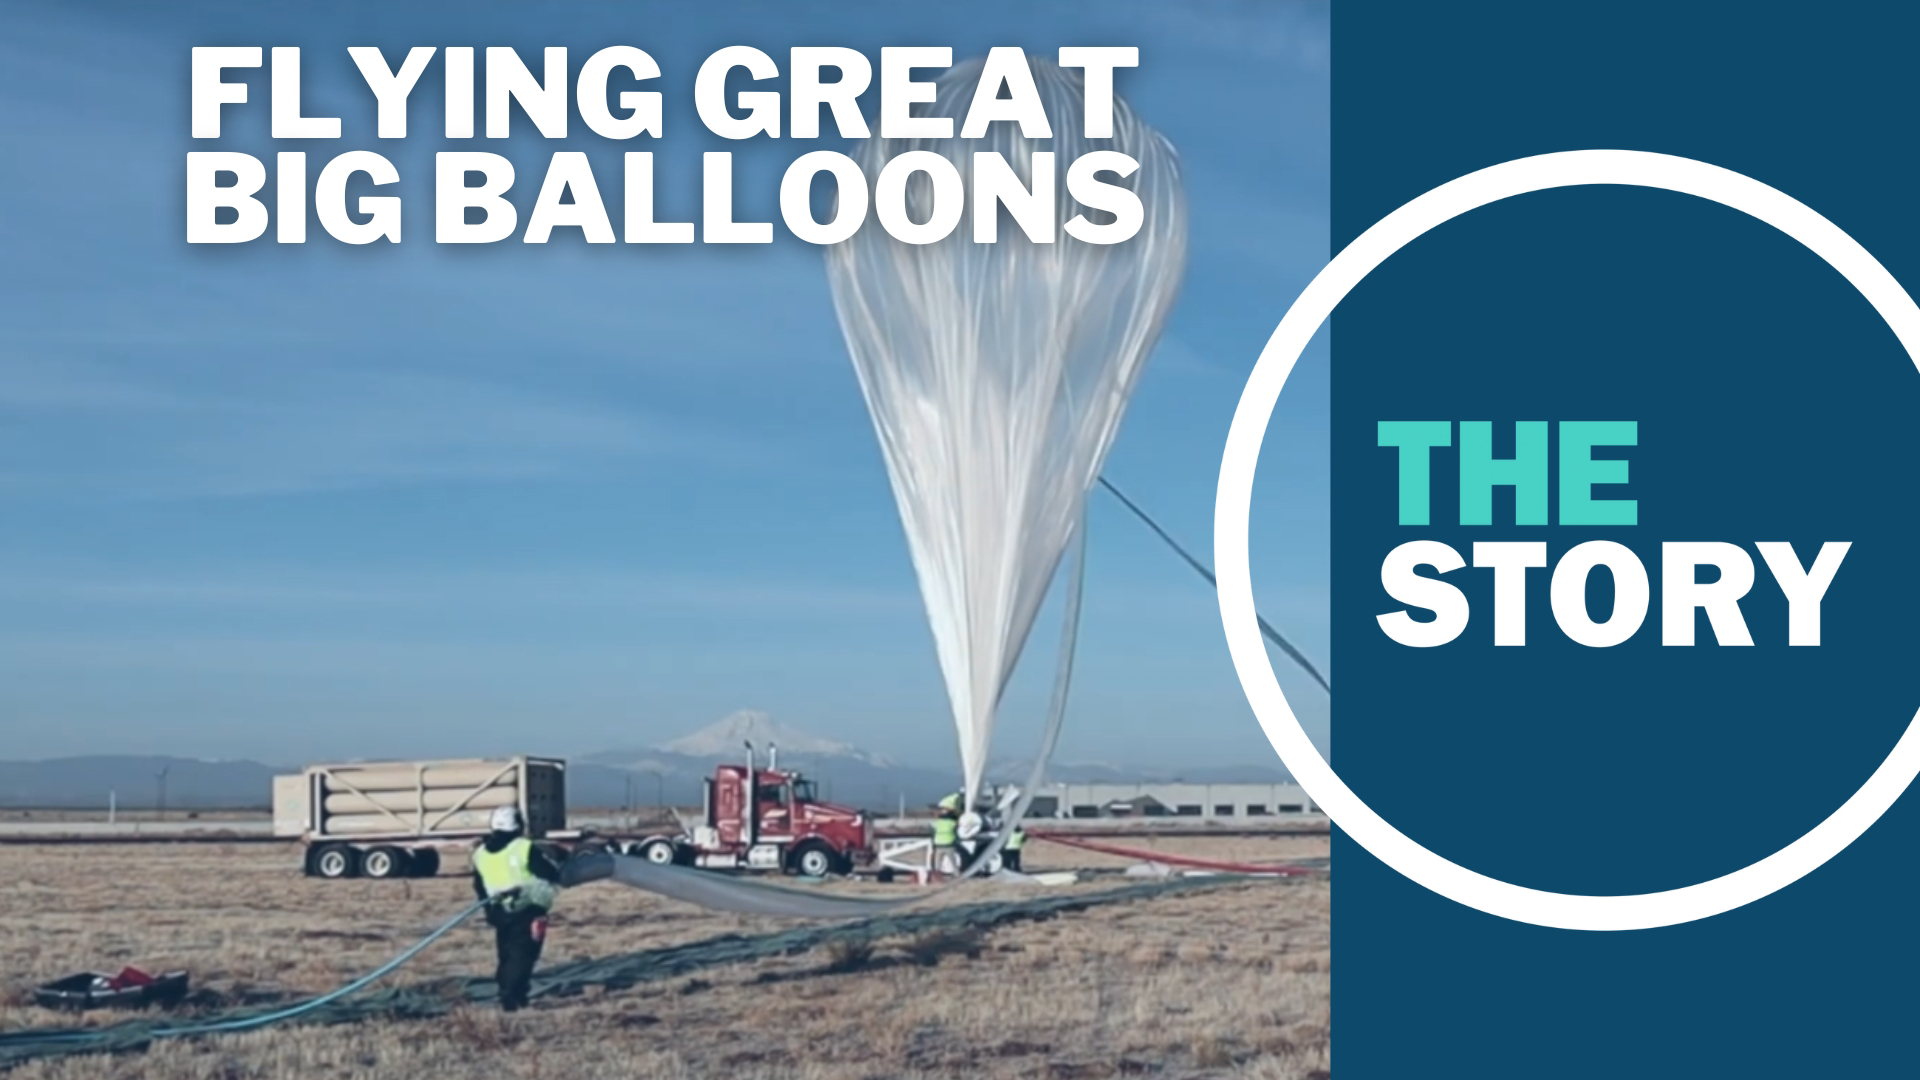 After the saga of China’s “spy balloon” crossing over the U.S., we turned to Tillamook-based Near Space for context on what balloons can do.